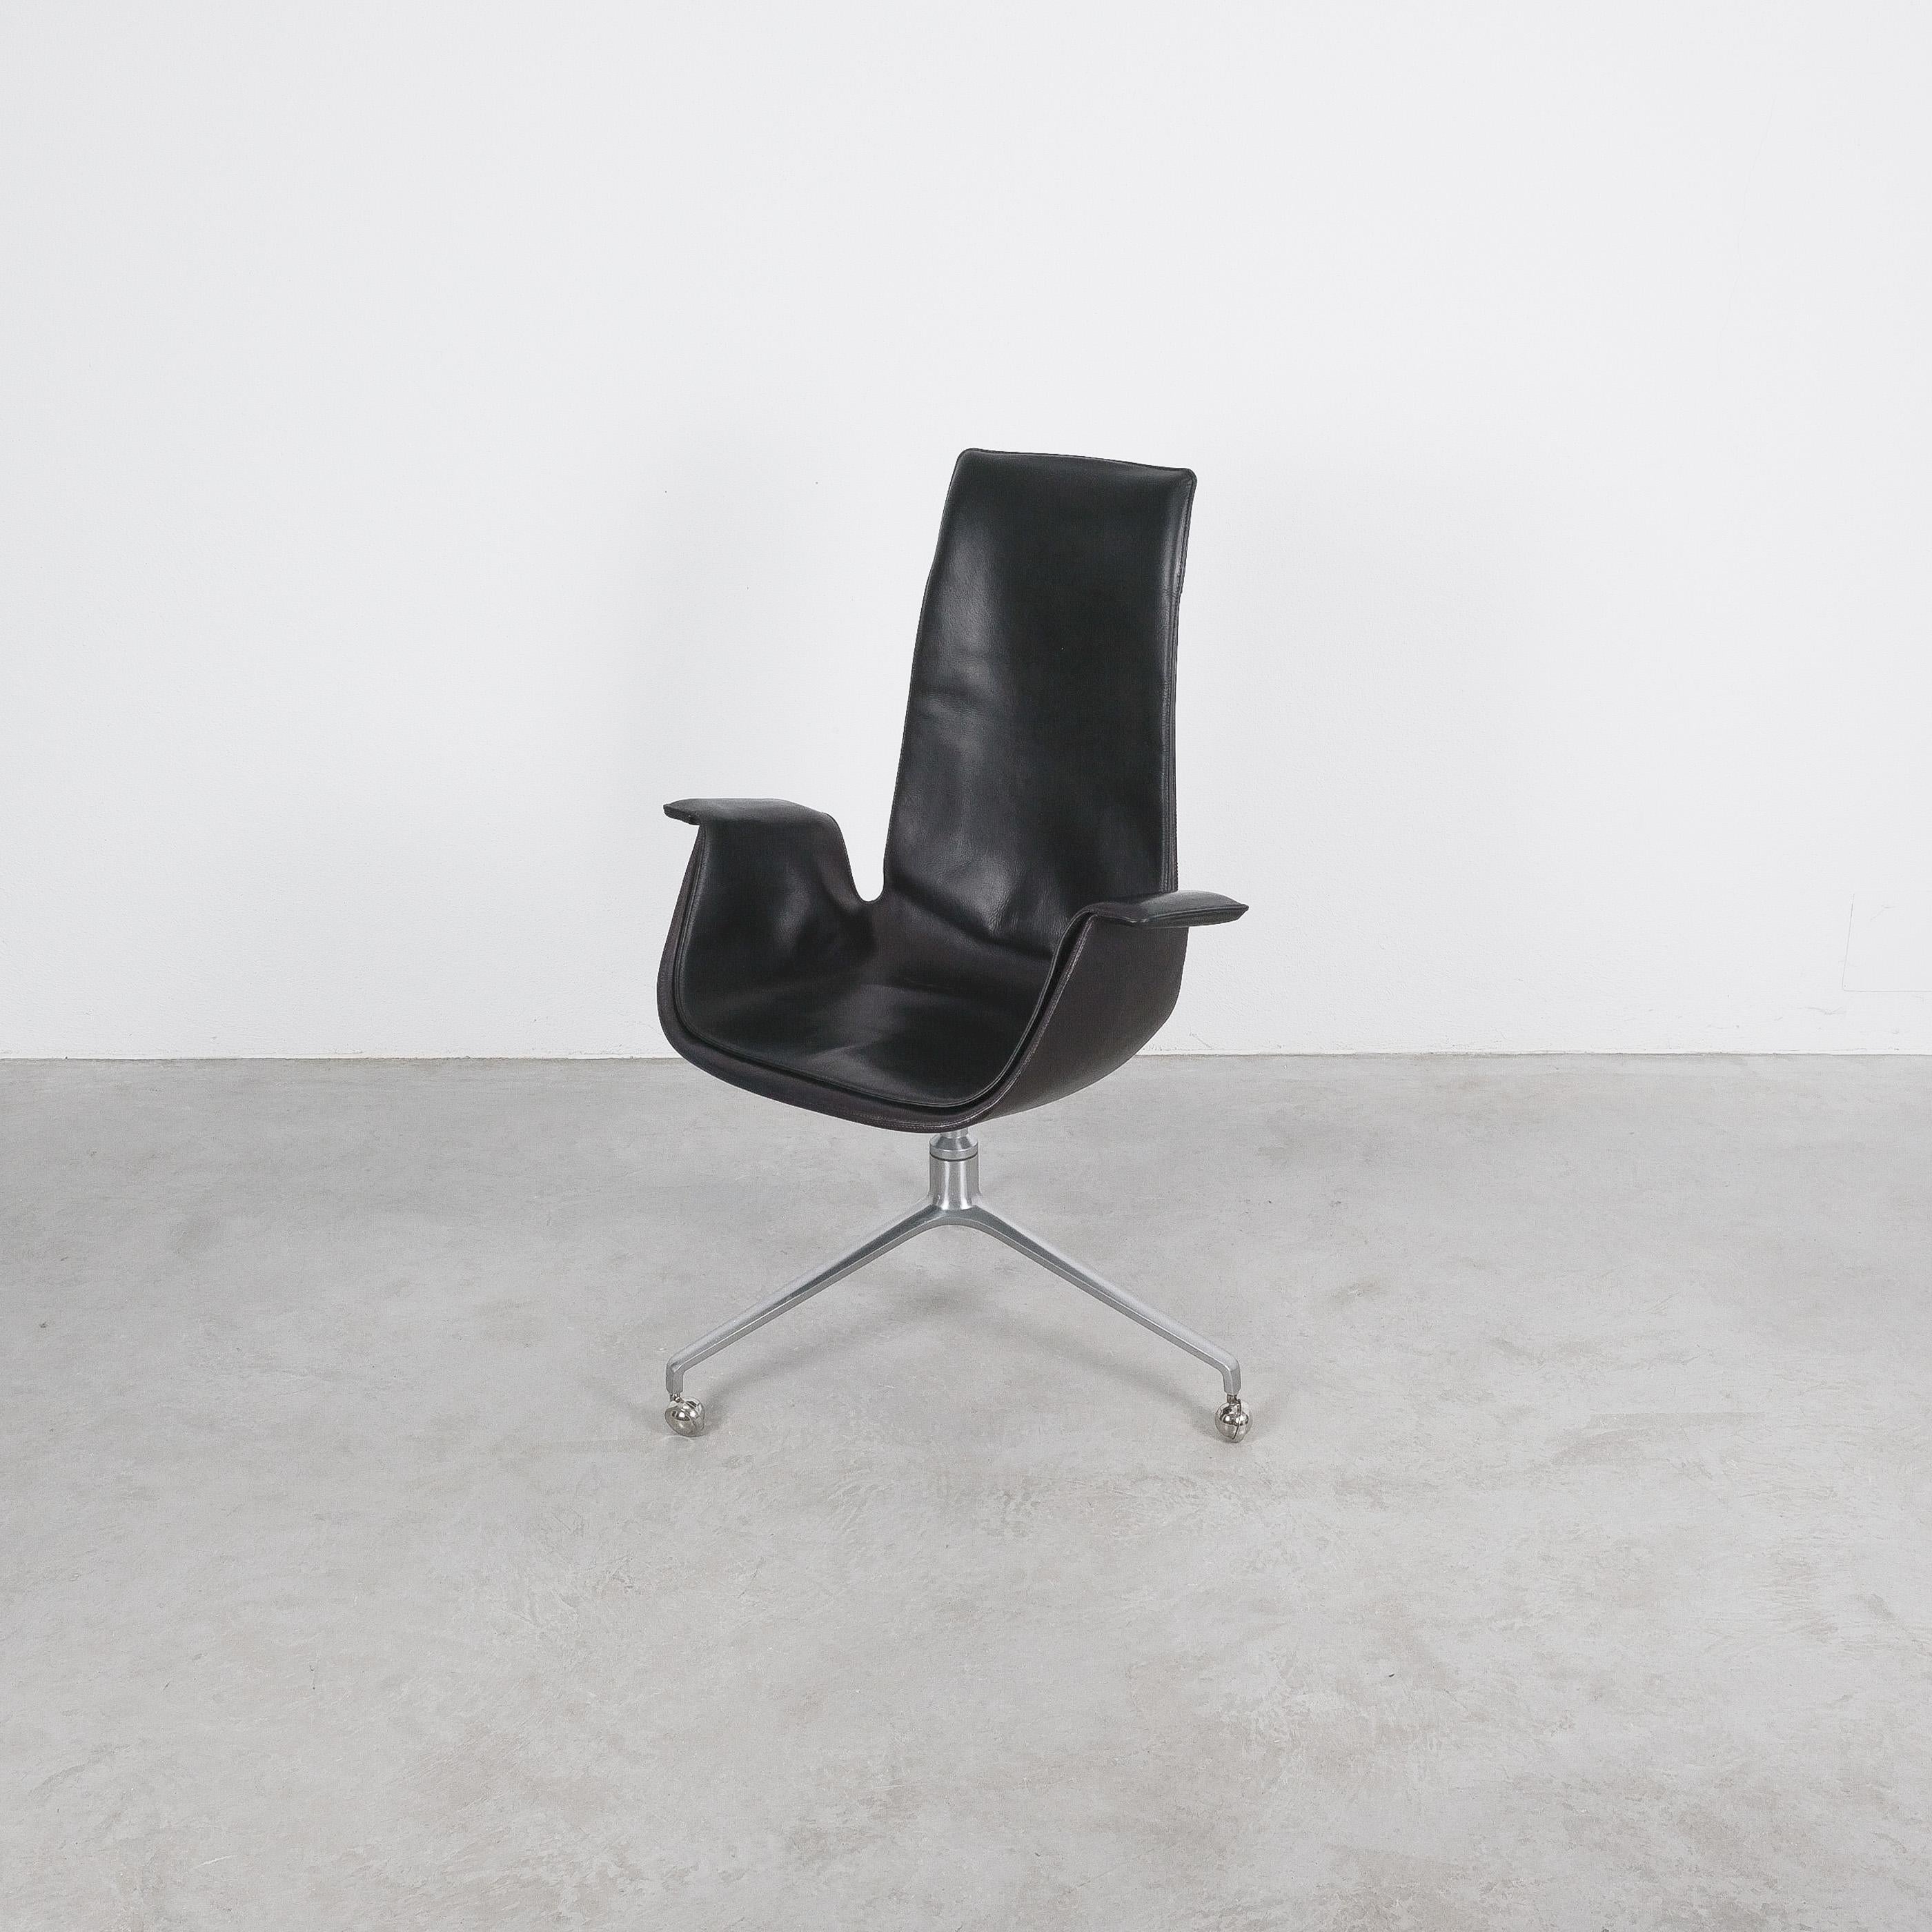 Fabricius and Kastholm Black High Back Bird Desk Chair Swivel Base FK 6725, 1964 In Good Condition For Sale In Vienna, AT